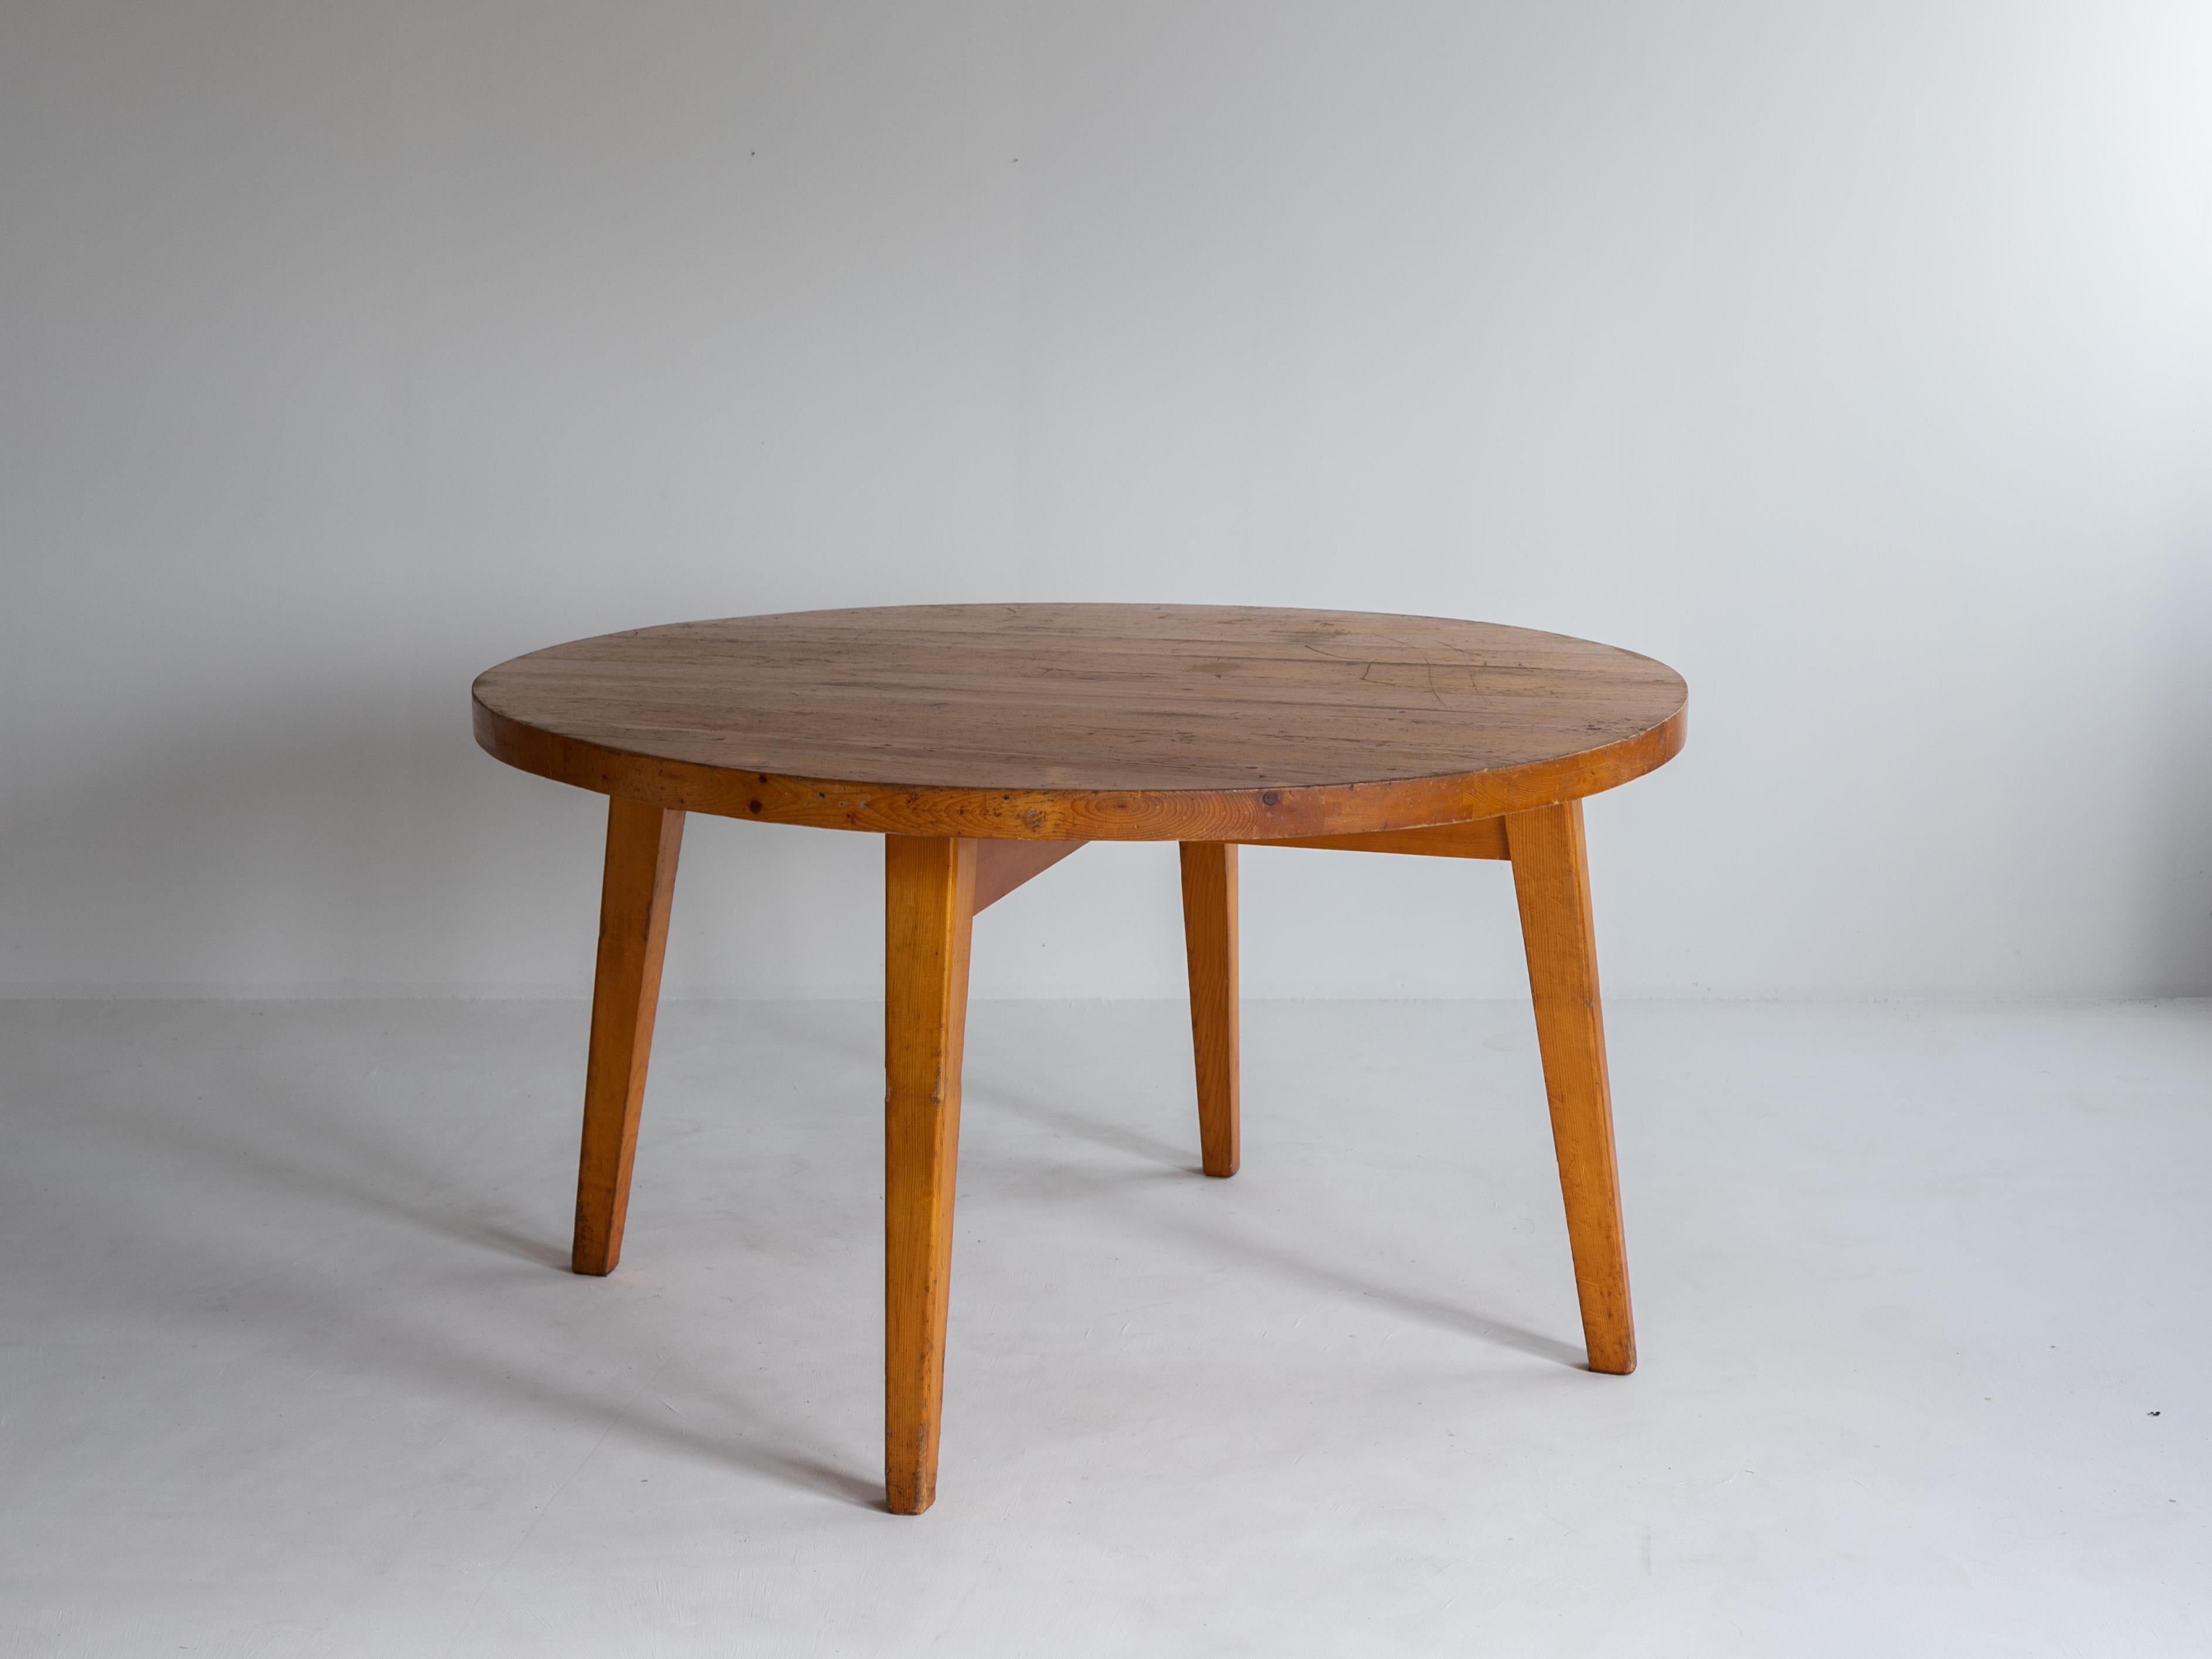 Vintage round table by Christian Durupt and Charlotte Perriand, 1968

Rare large round table designed by Christian Durupt and Charlotte Perriand for the ski resort Méribel in the 1960s.
Rare large round table.
Original and in good